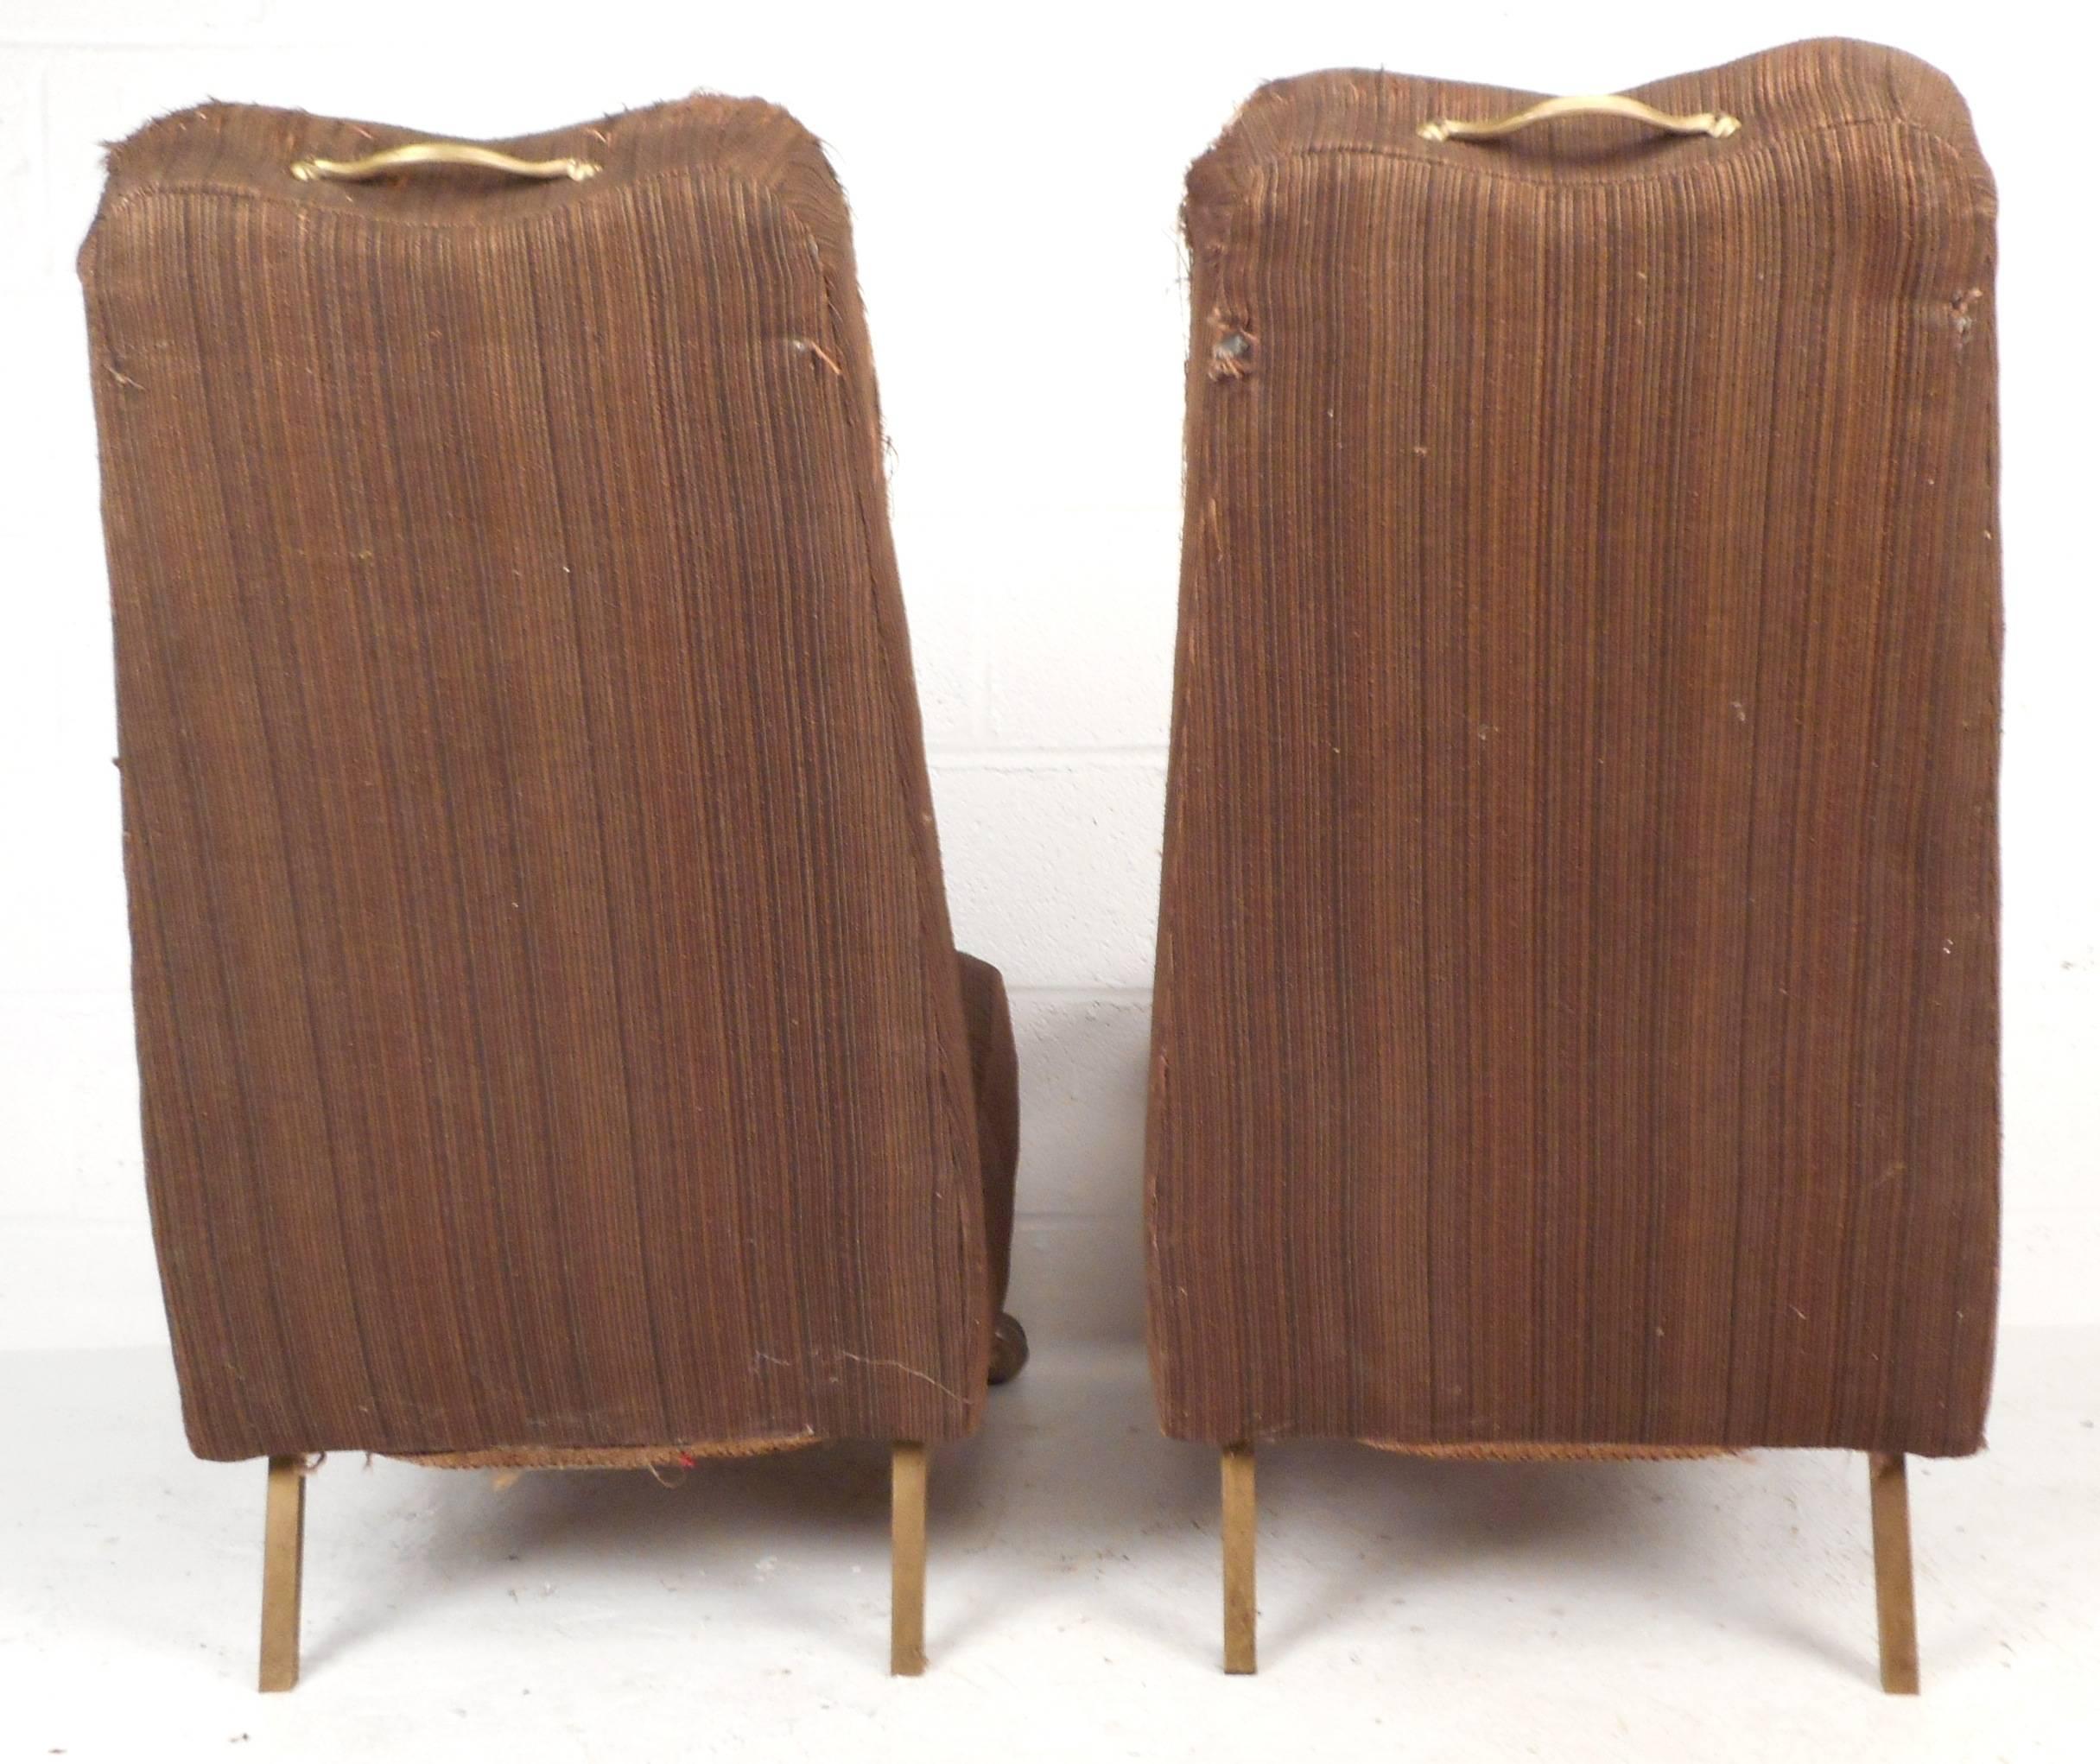 Late 20th Century Pair of Mid-Century Modern High Back Slipper Chairs